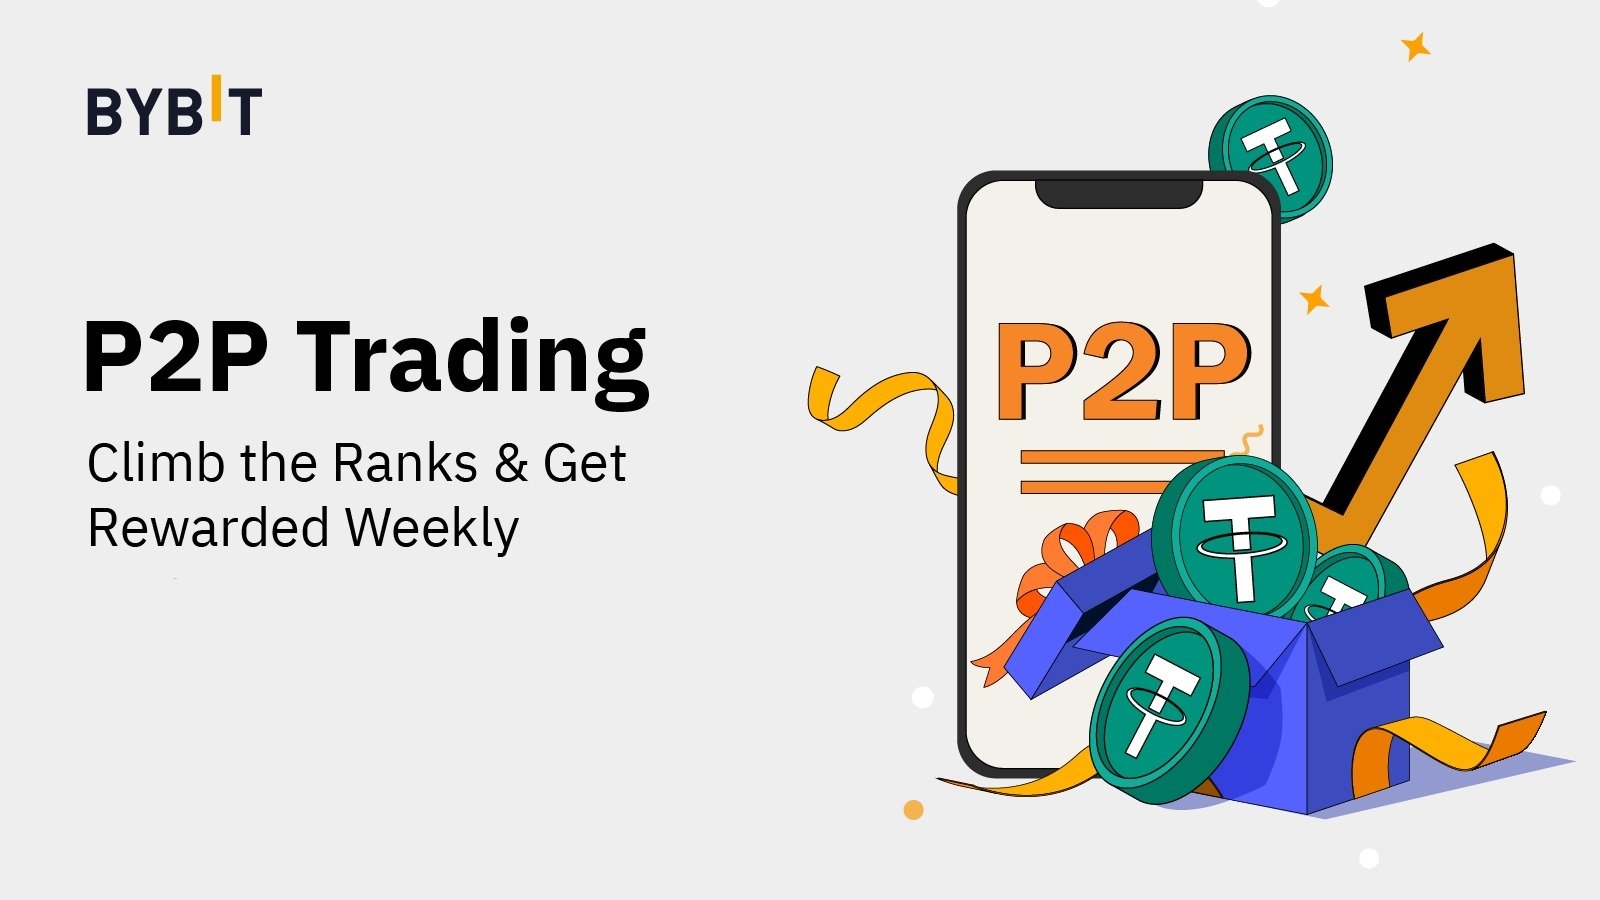 Earn weekly incentives through P2P trading on Bybit.